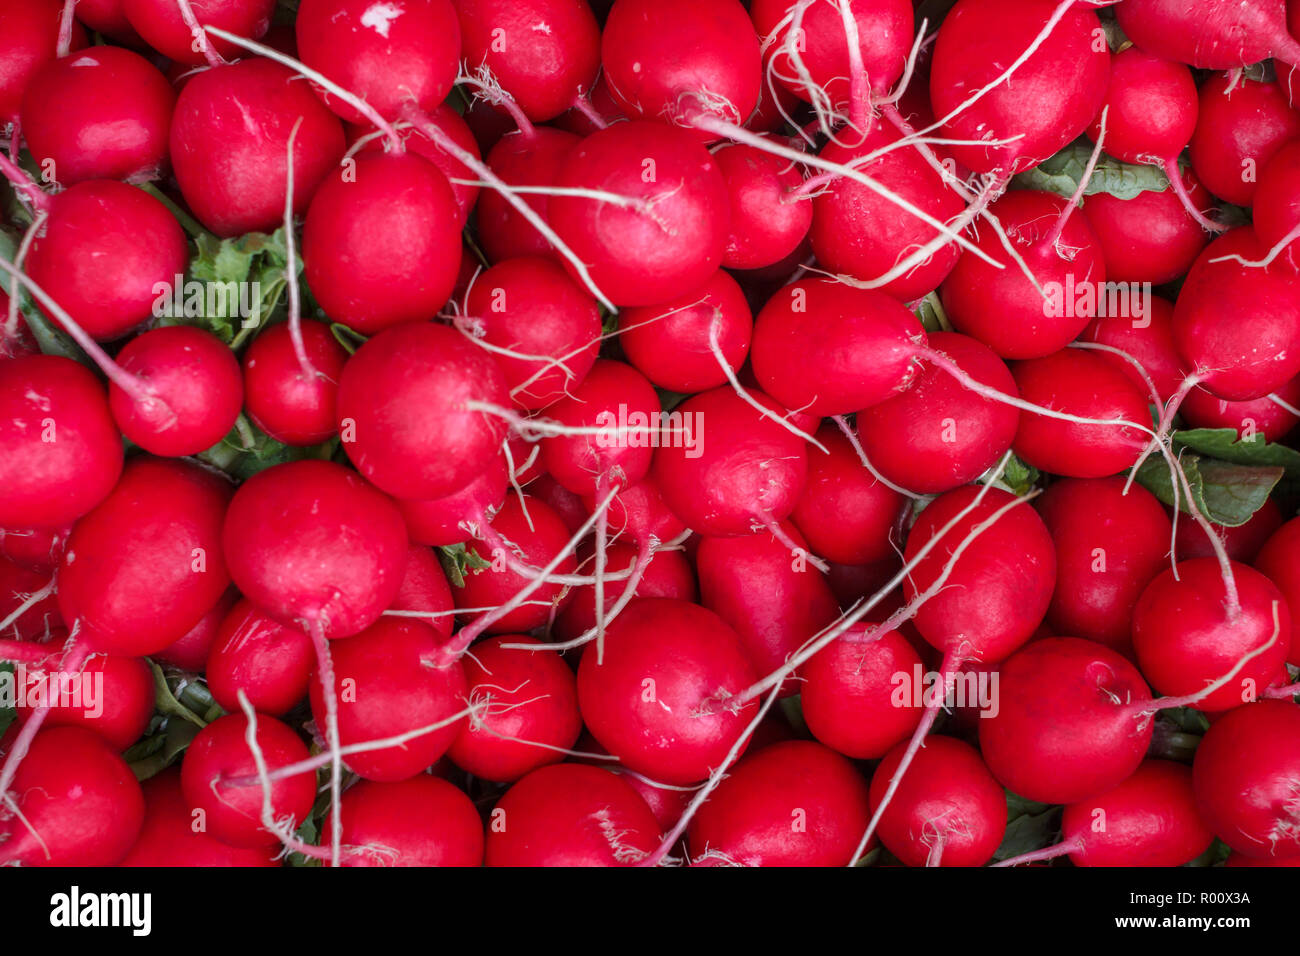 Many radishes packed together and shot from above. Stock Photo